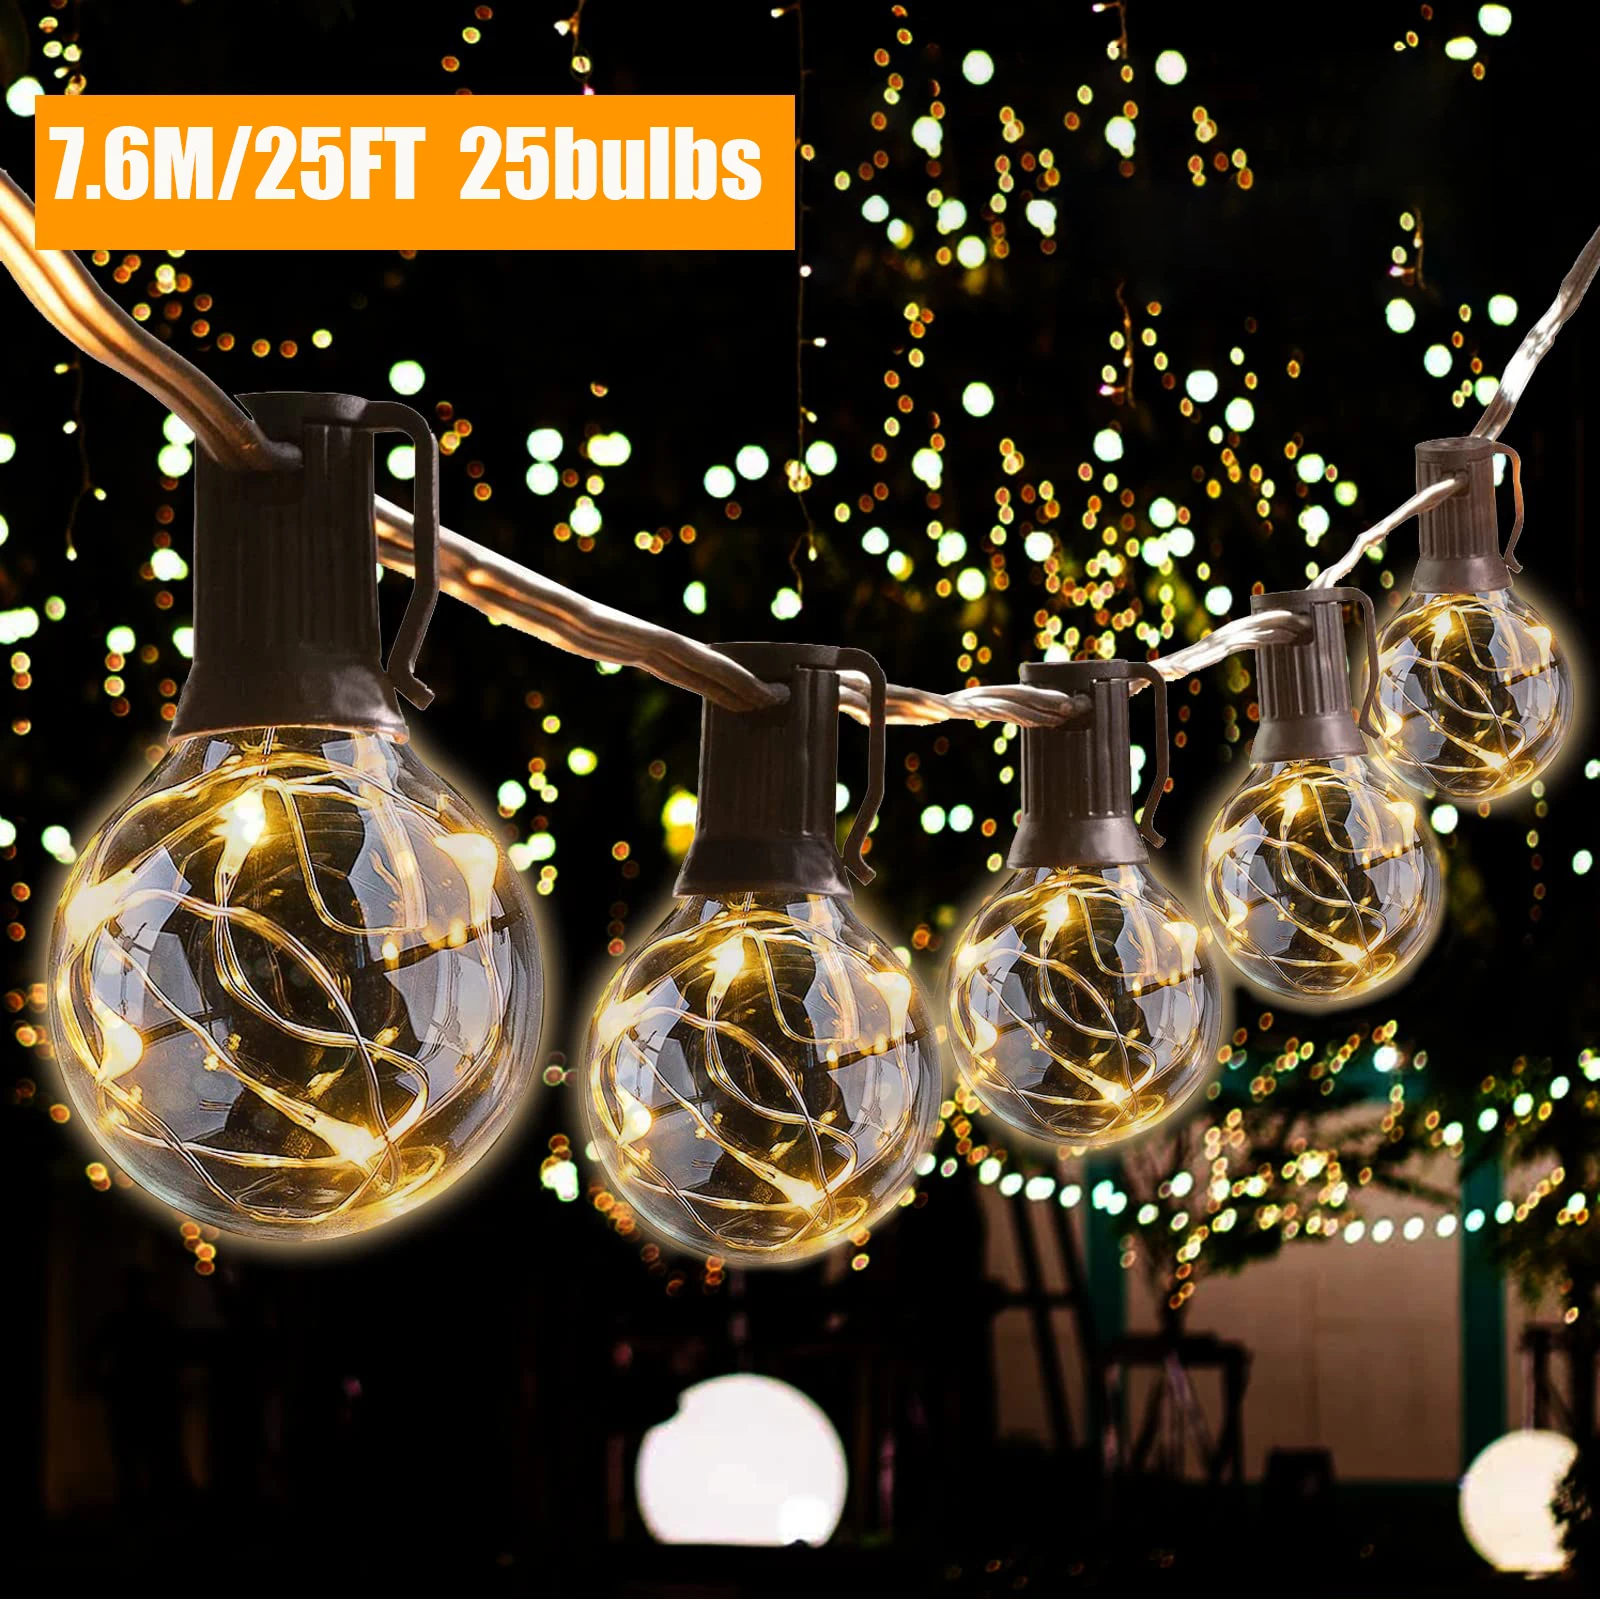 G40 Led String Lights 25FT 25PCS Copper wire LED Bulb Plastic IP45 Waterproof Garland Strings for Patio Christmas Wedding Decor 25pcs kraft invitation envelopes brown kraft envelopes for invitations photos wedding announcements notes greeting cards